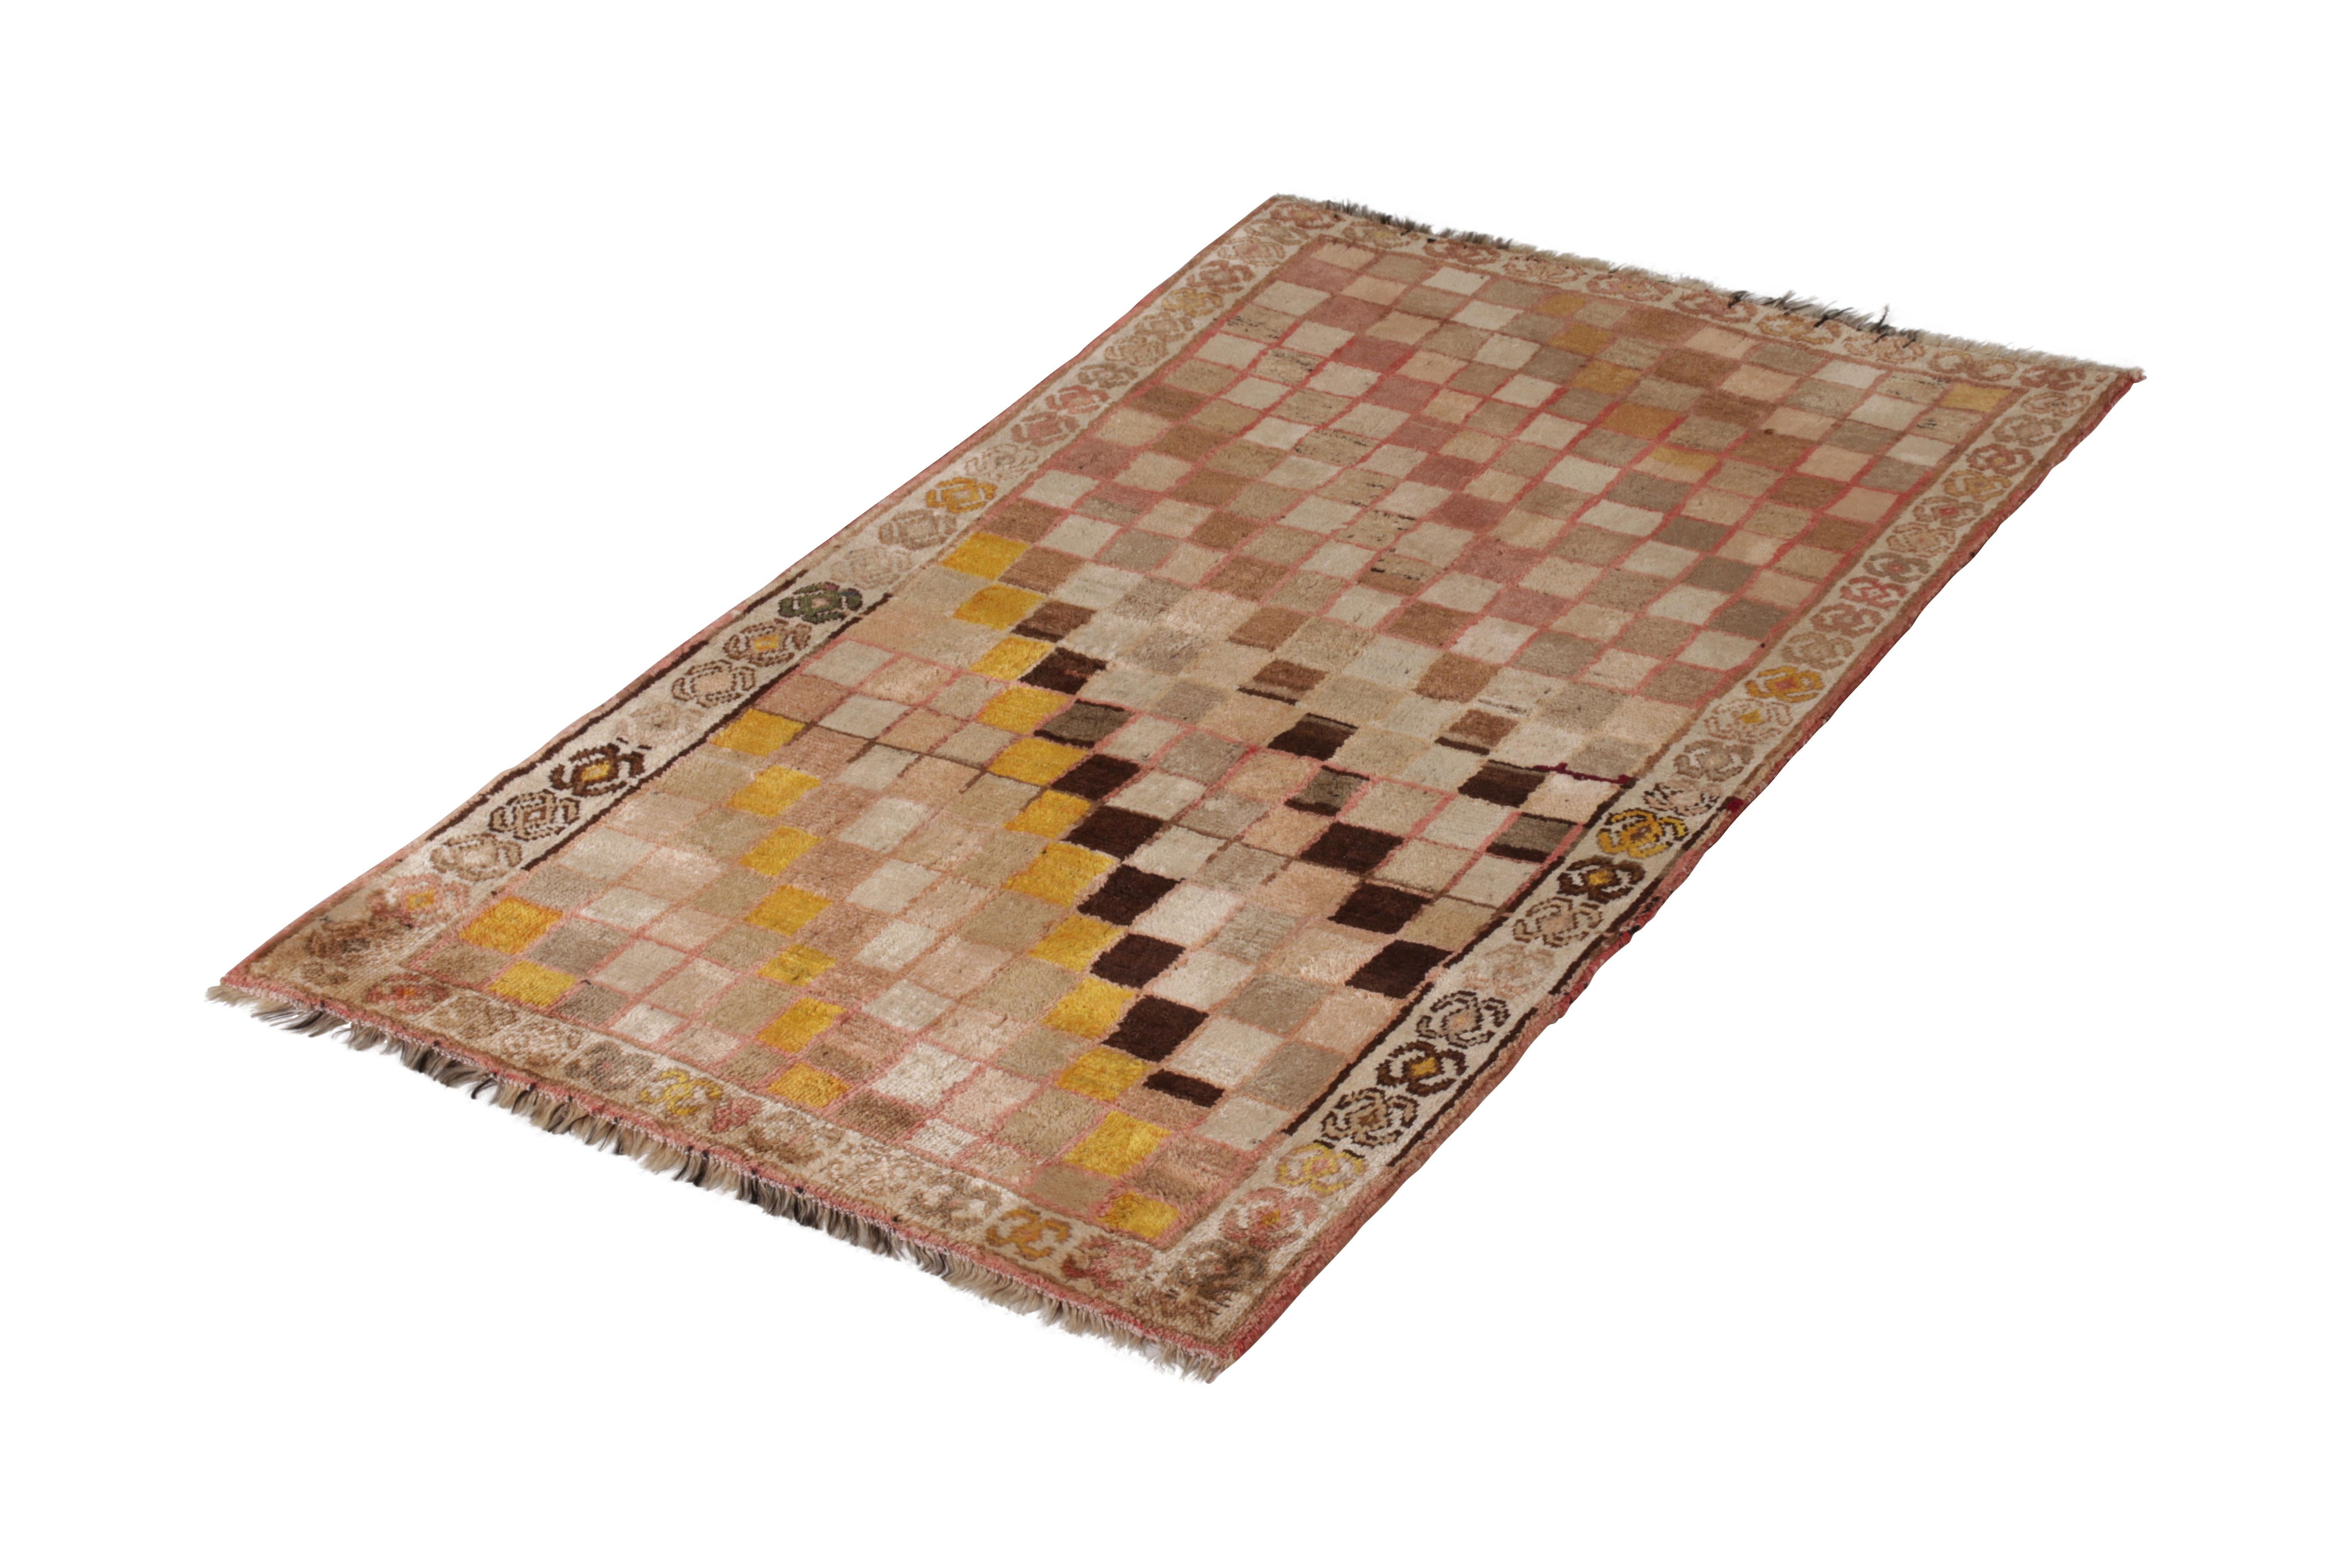 Hand knotted in wool originating circa 1950-1960, this vintage Persian rug connotes a midcentury Gabbeh rug design in a fabulously unique modern colorway, employing a classic beige-brown with a prevailing pink hue among several intriguing, colorful